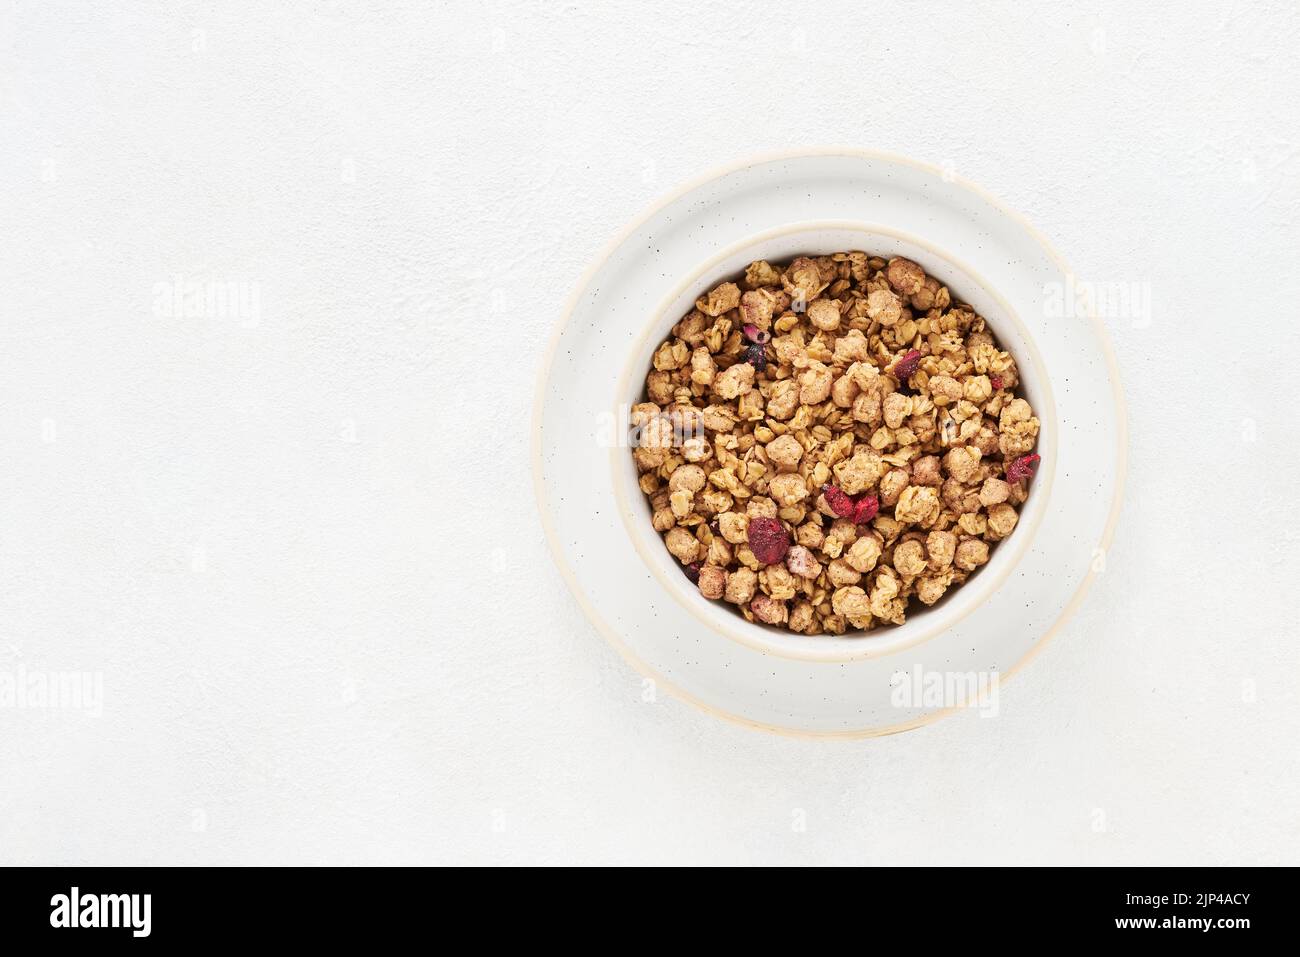 Organic wholegrain granola or crunchy muesli with dried berries in a bowl on white concrete background. Top view, copy space for text Stock Photo